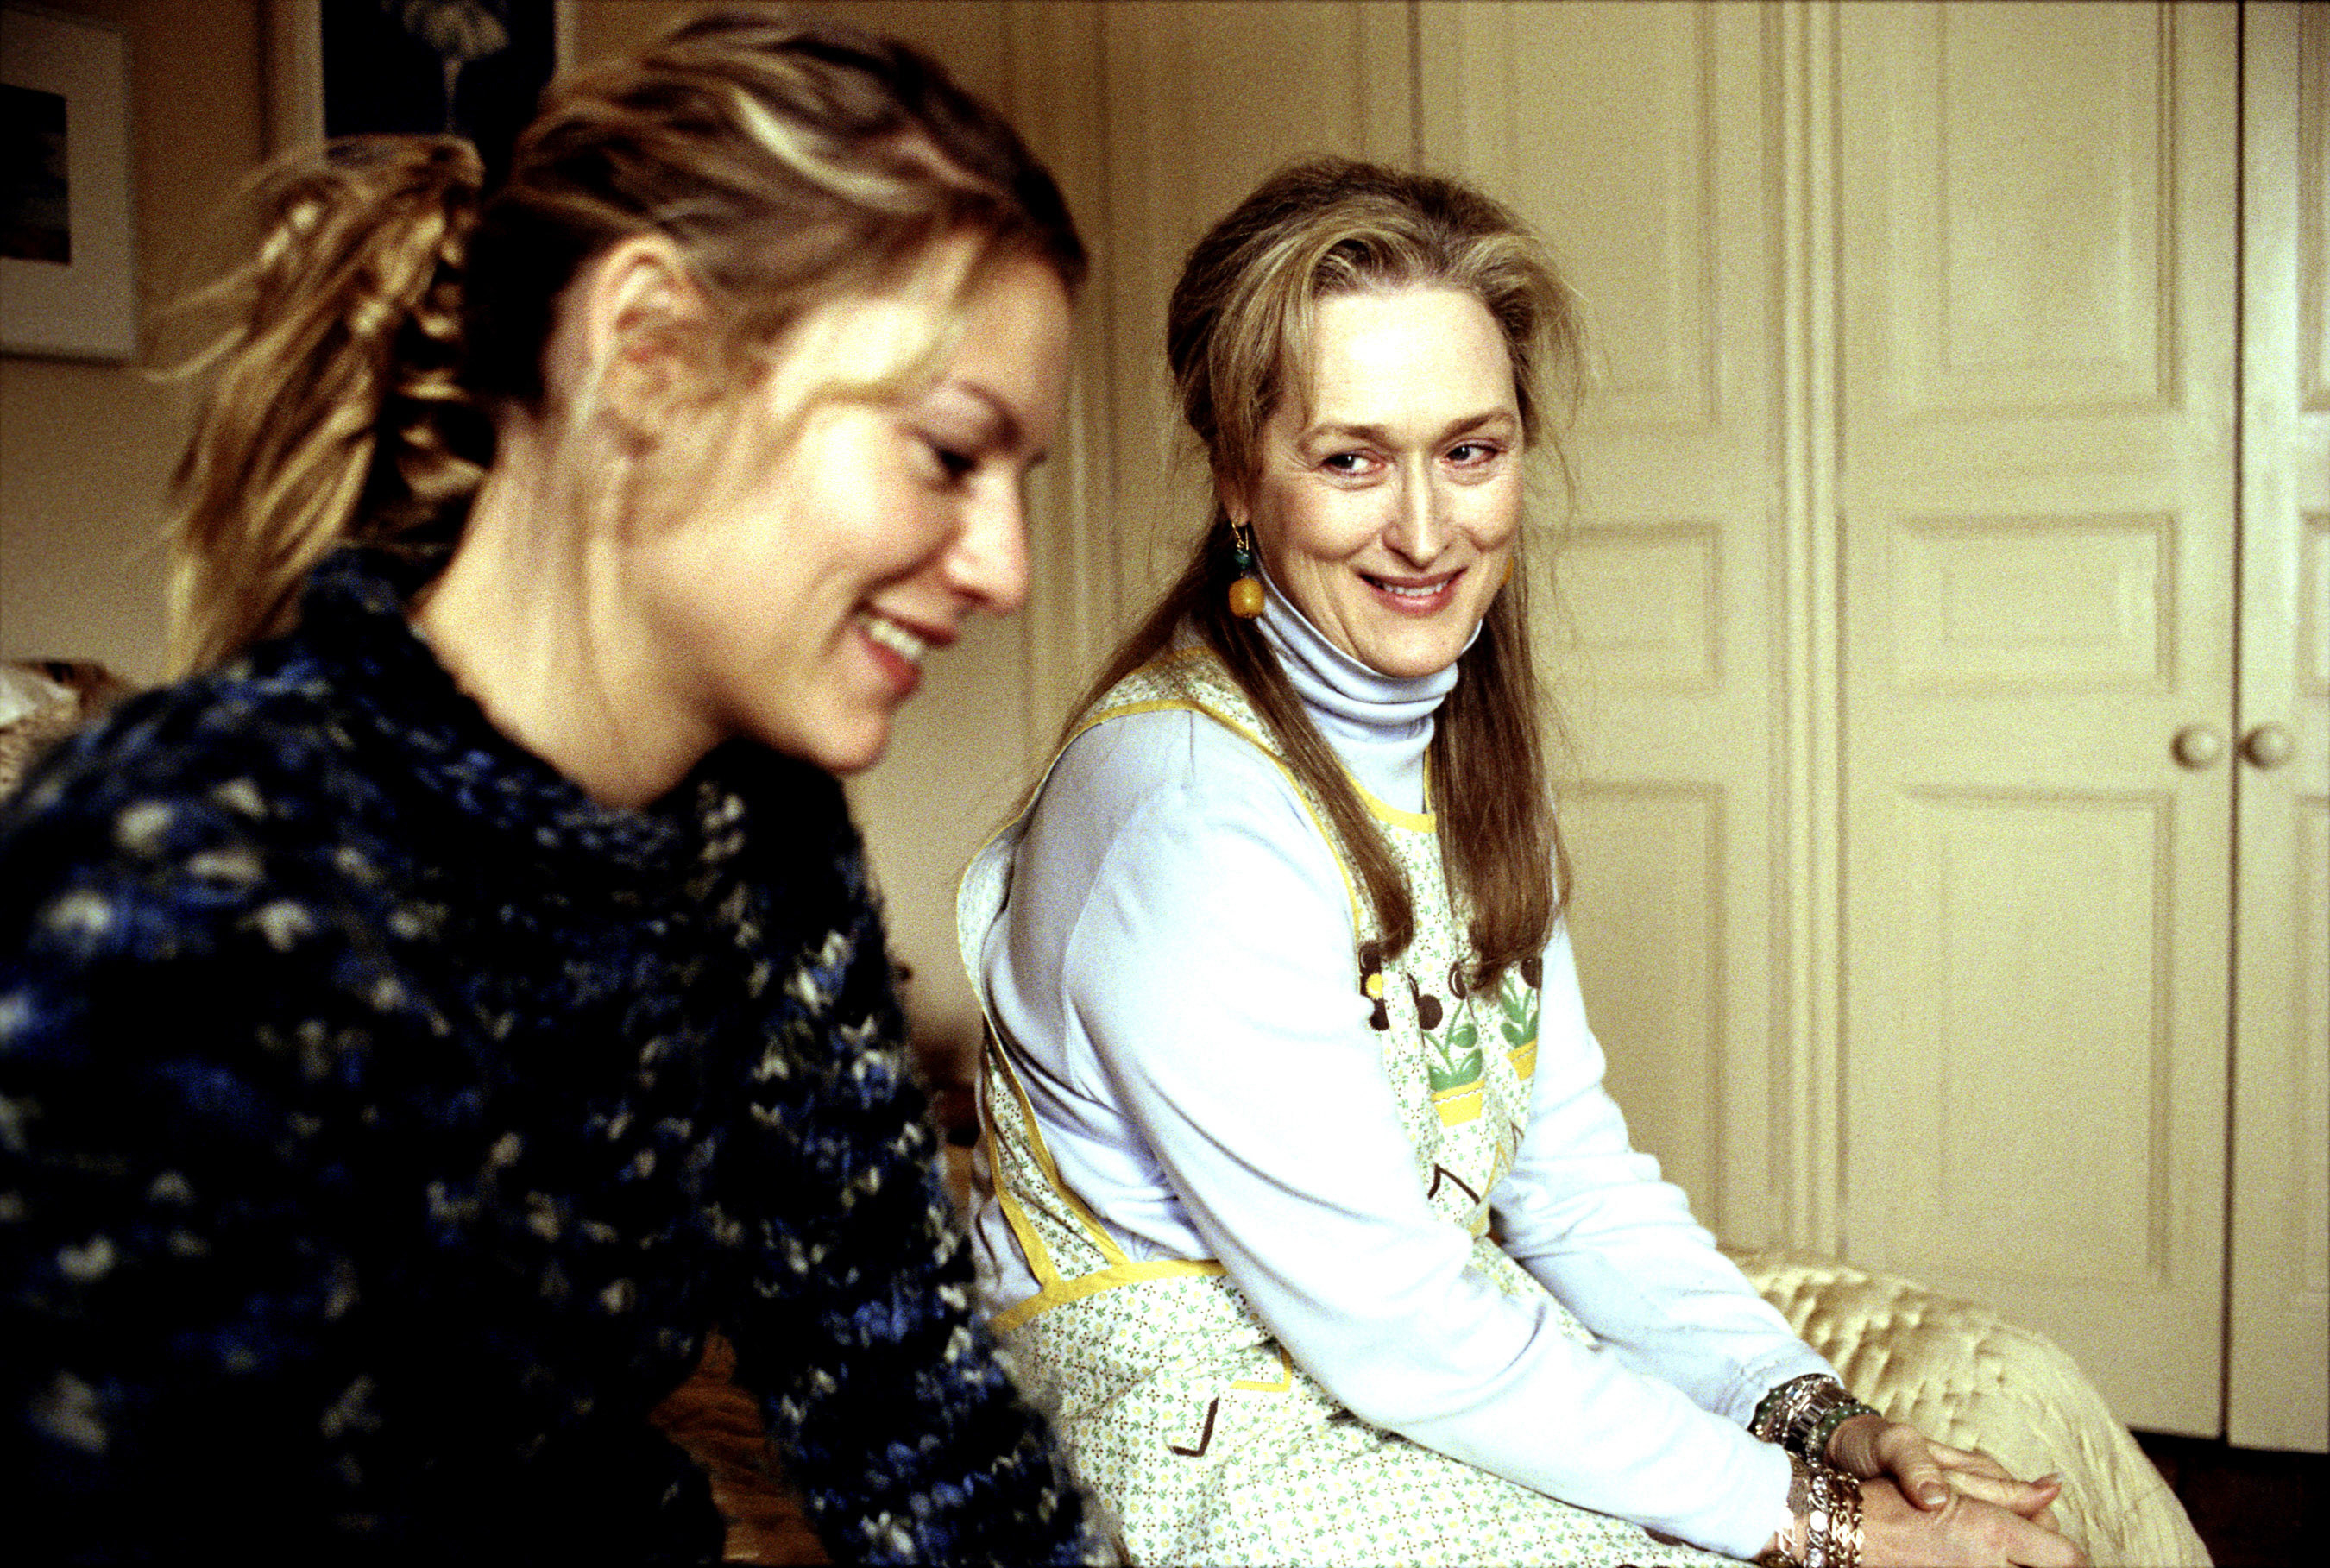 Claire Danes and Meryl Streep sit on a bed together